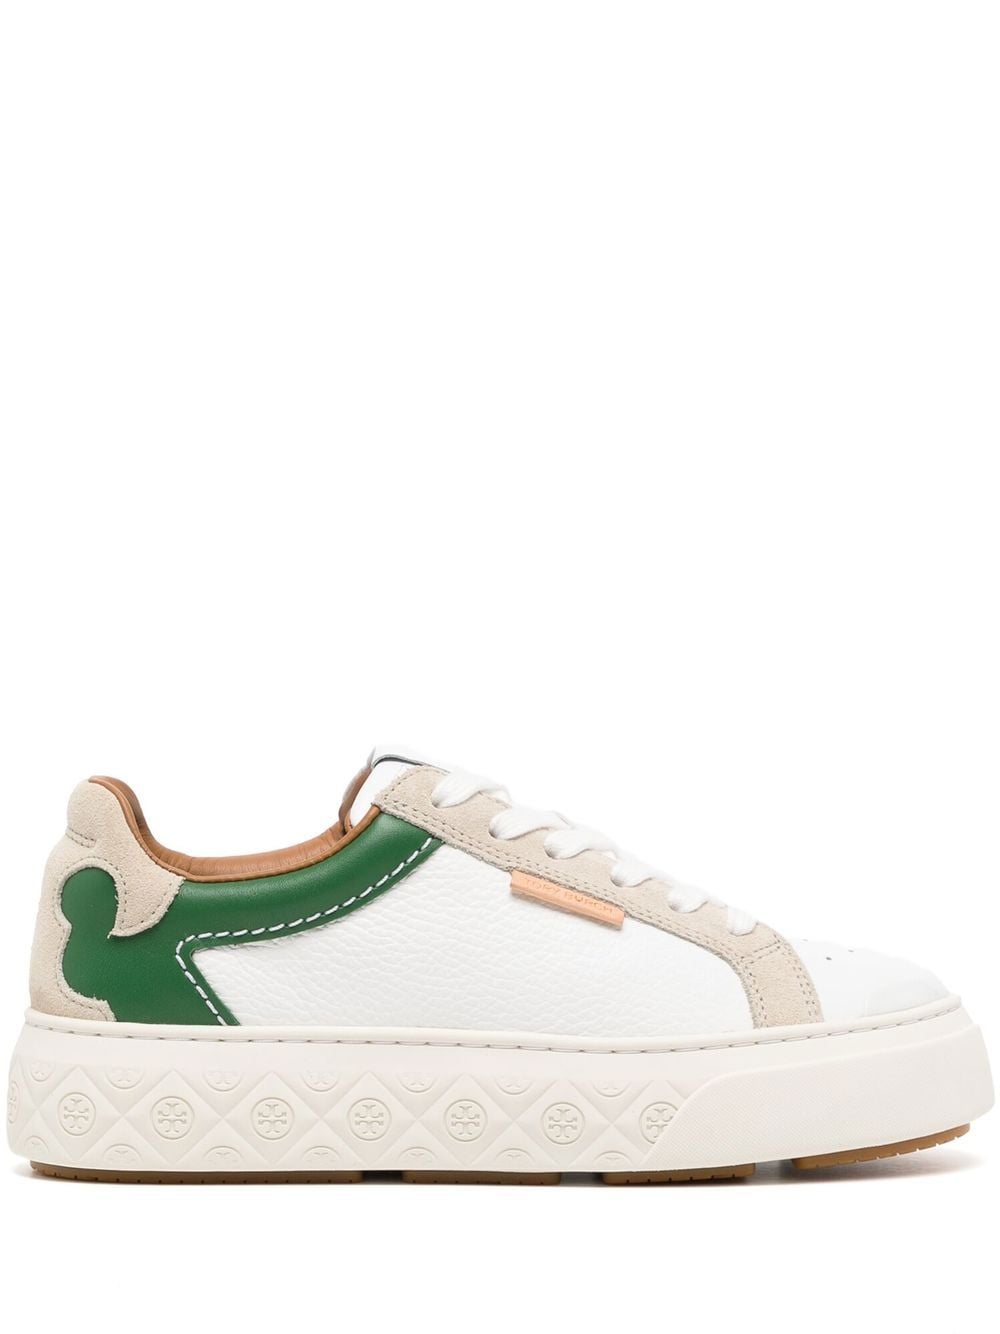 Tory Burch Ladybug Low-top Sneakers In Neutrals | ModeSens